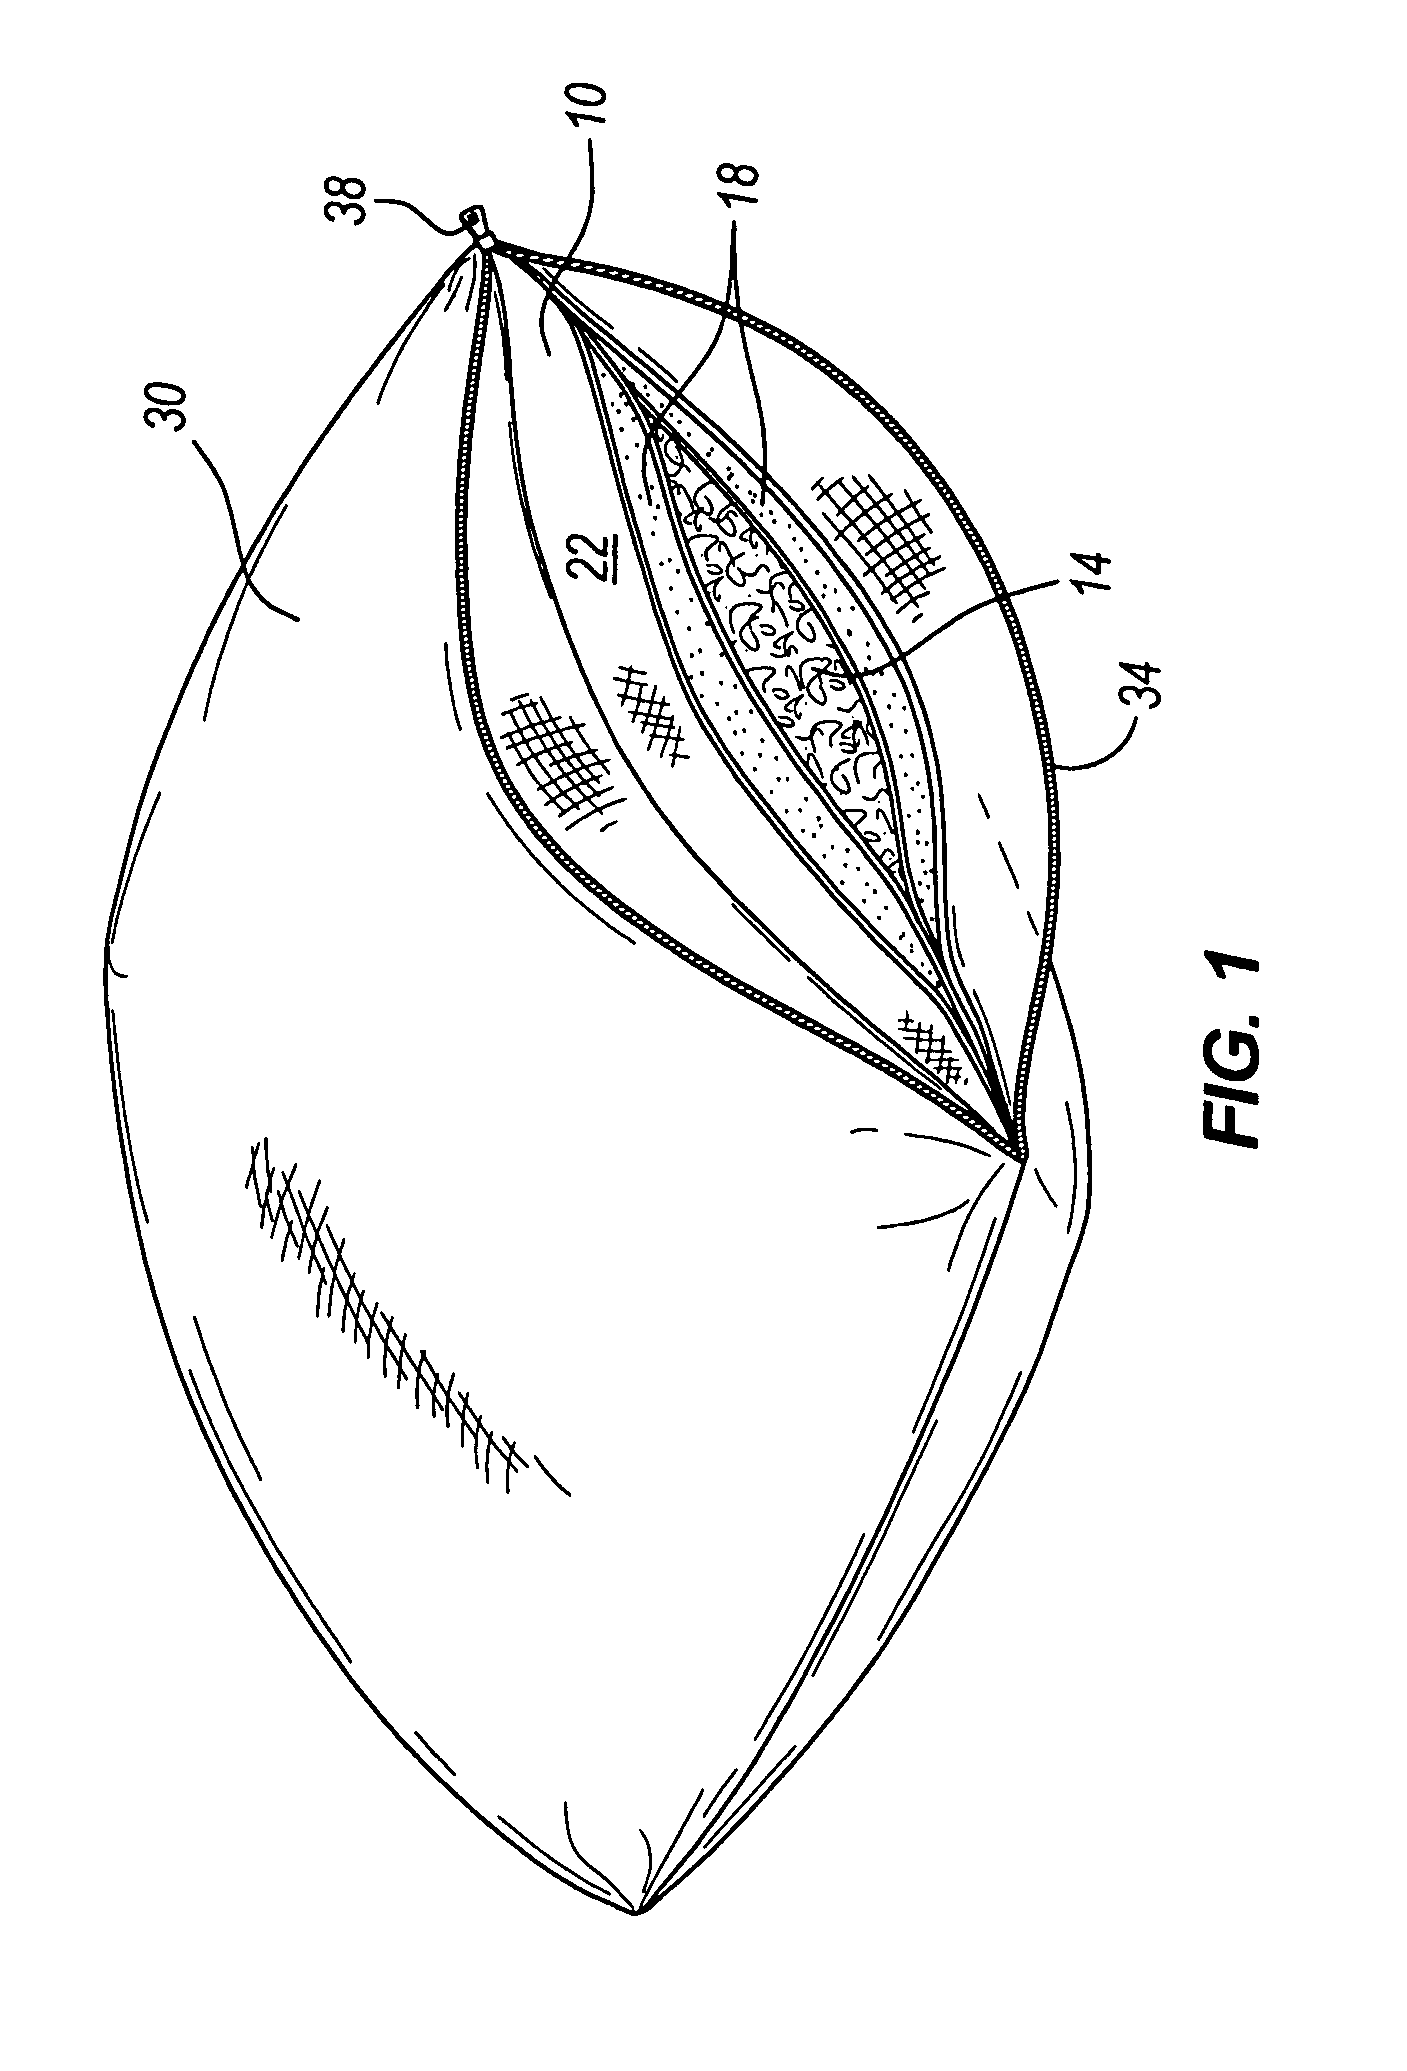 Pillow and method of manufacturing a pillow